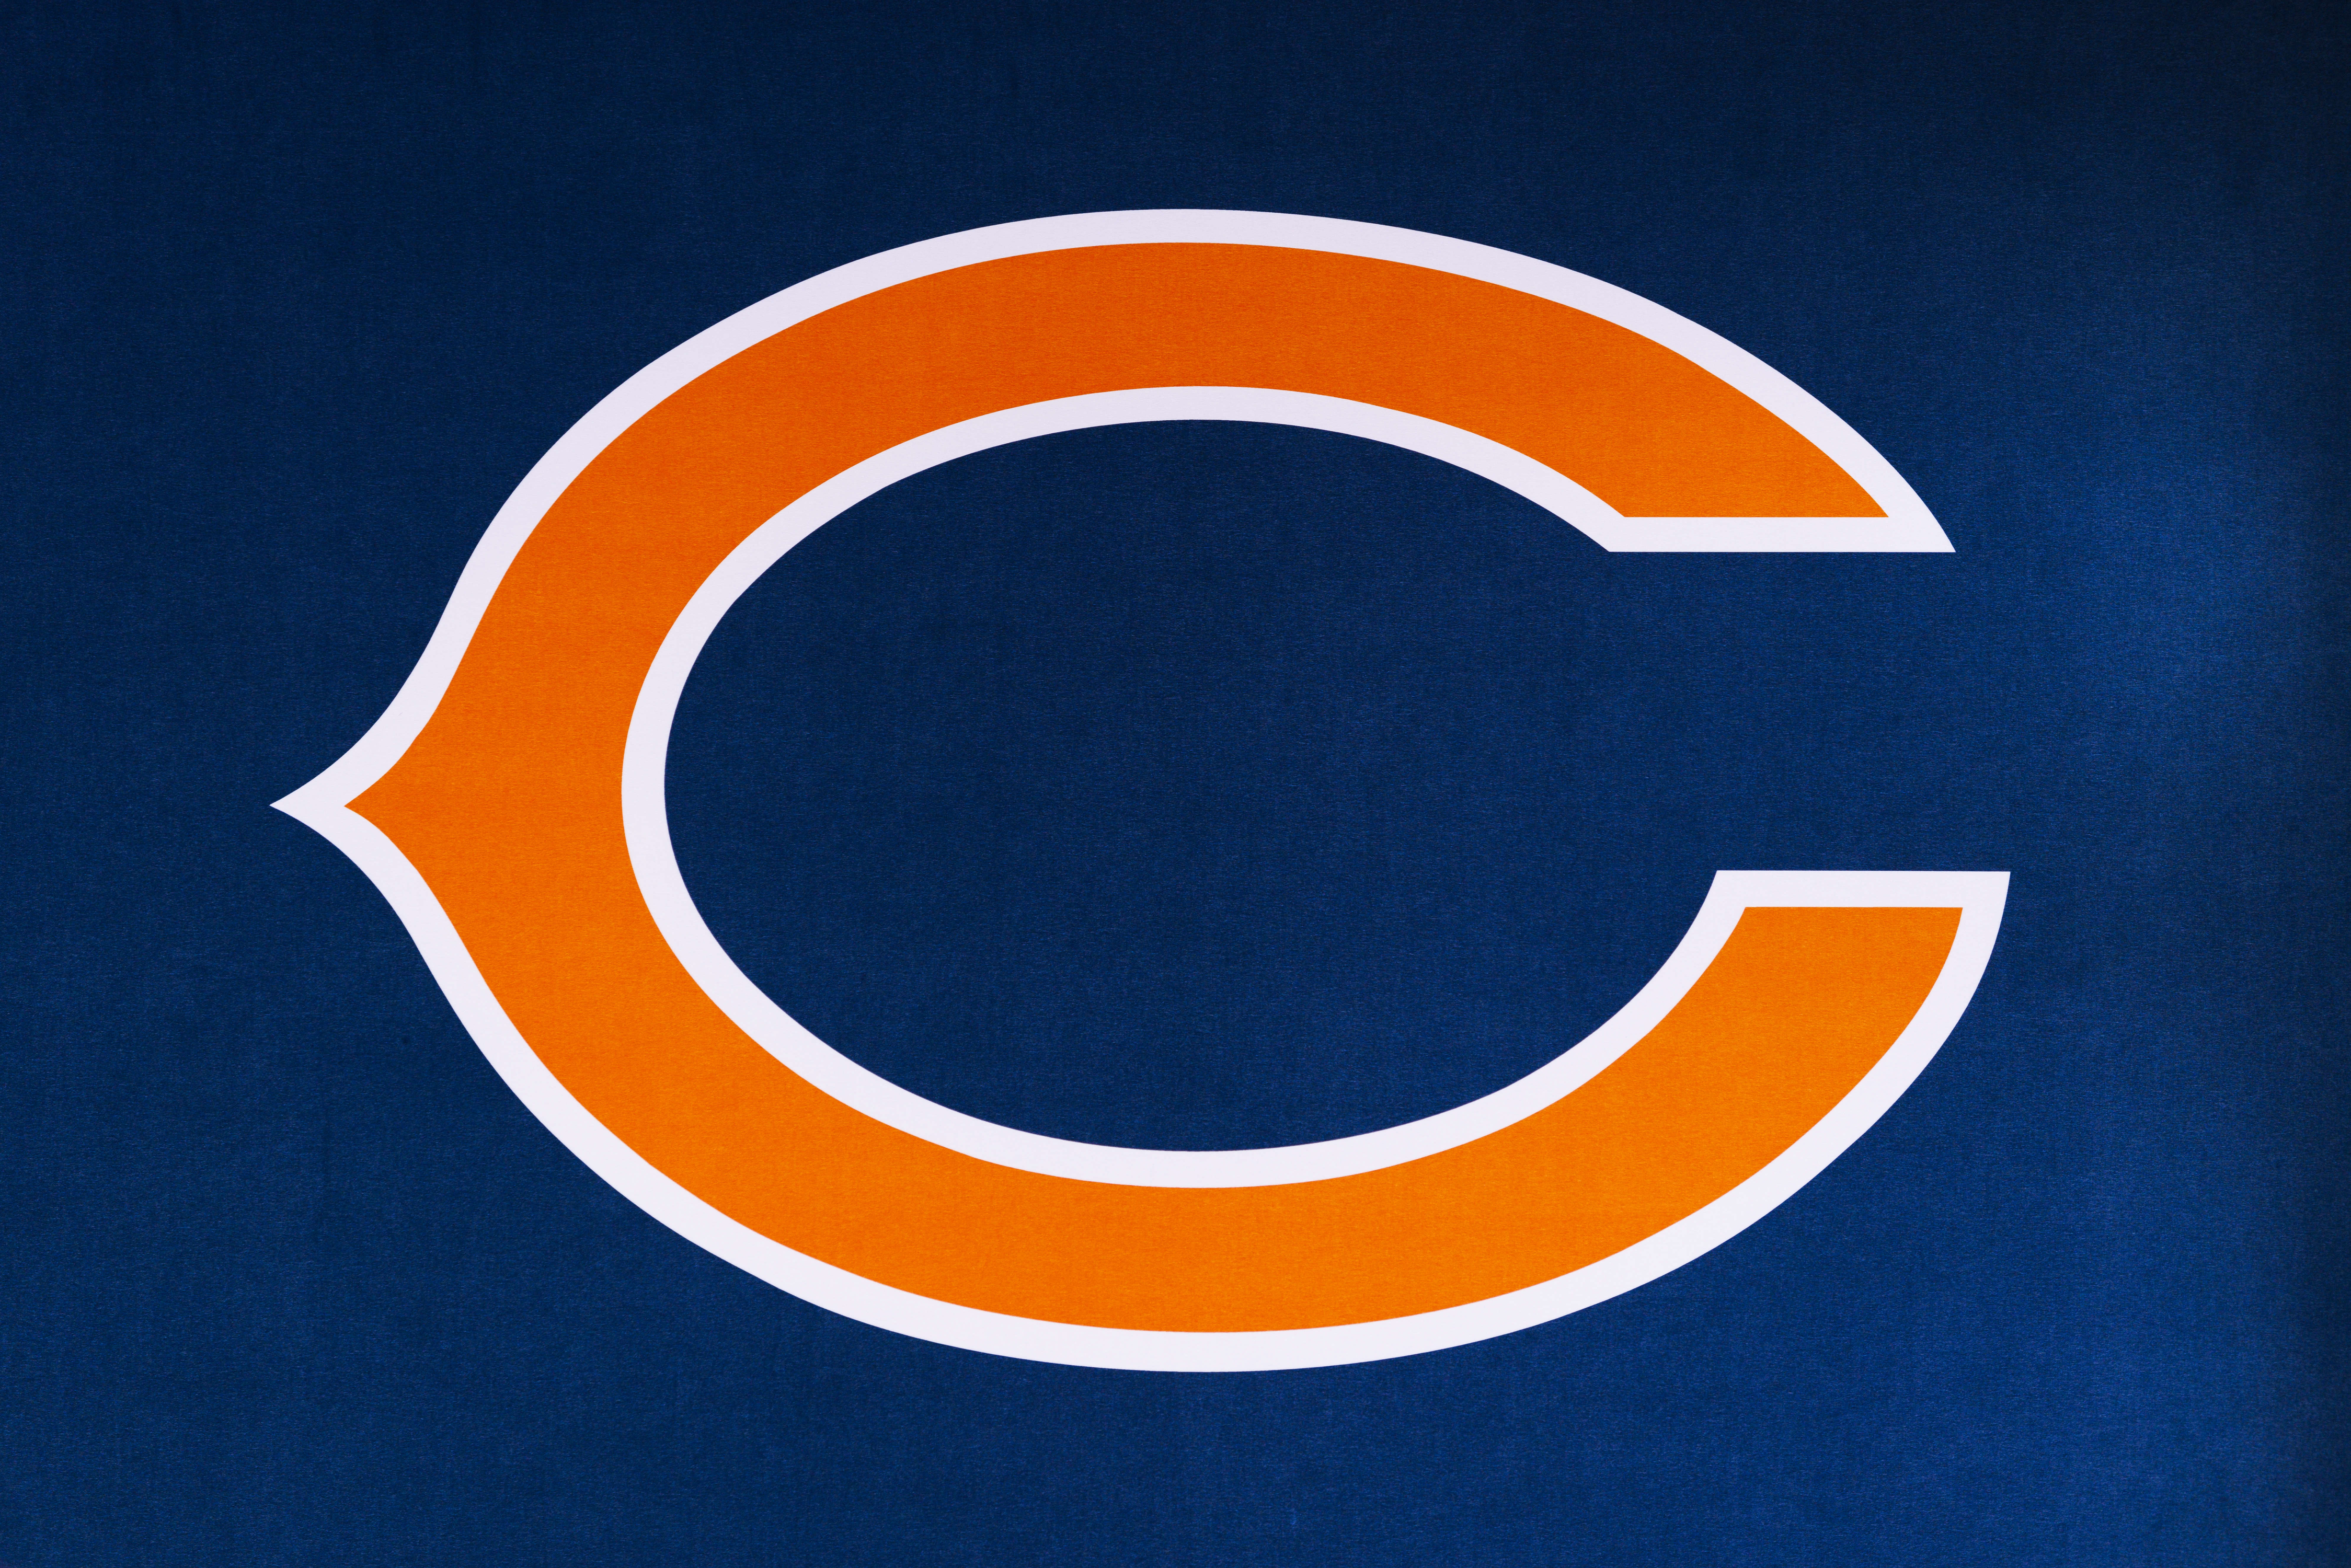 Mayor Johnson says new Bears' stadium is a good thing for Chicago